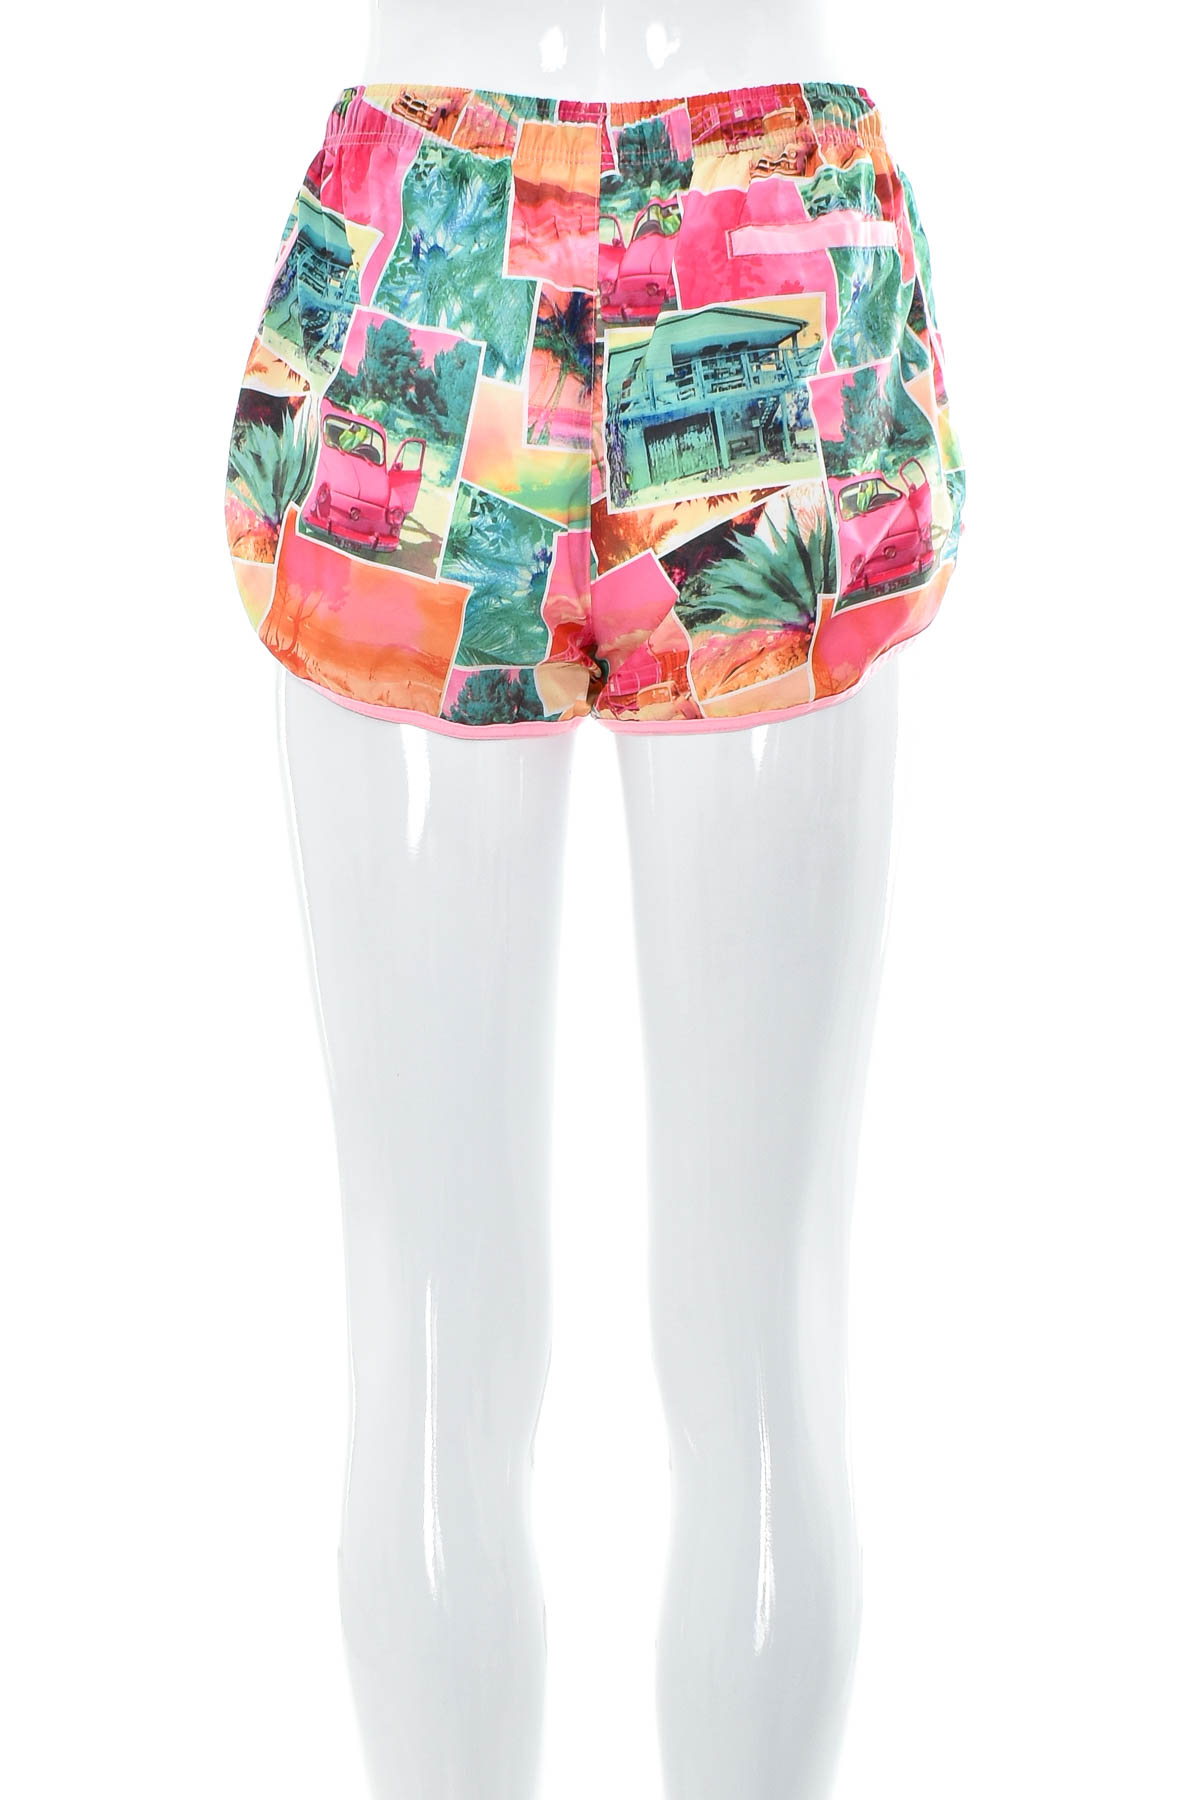 Shorts for girls - H&M - 1